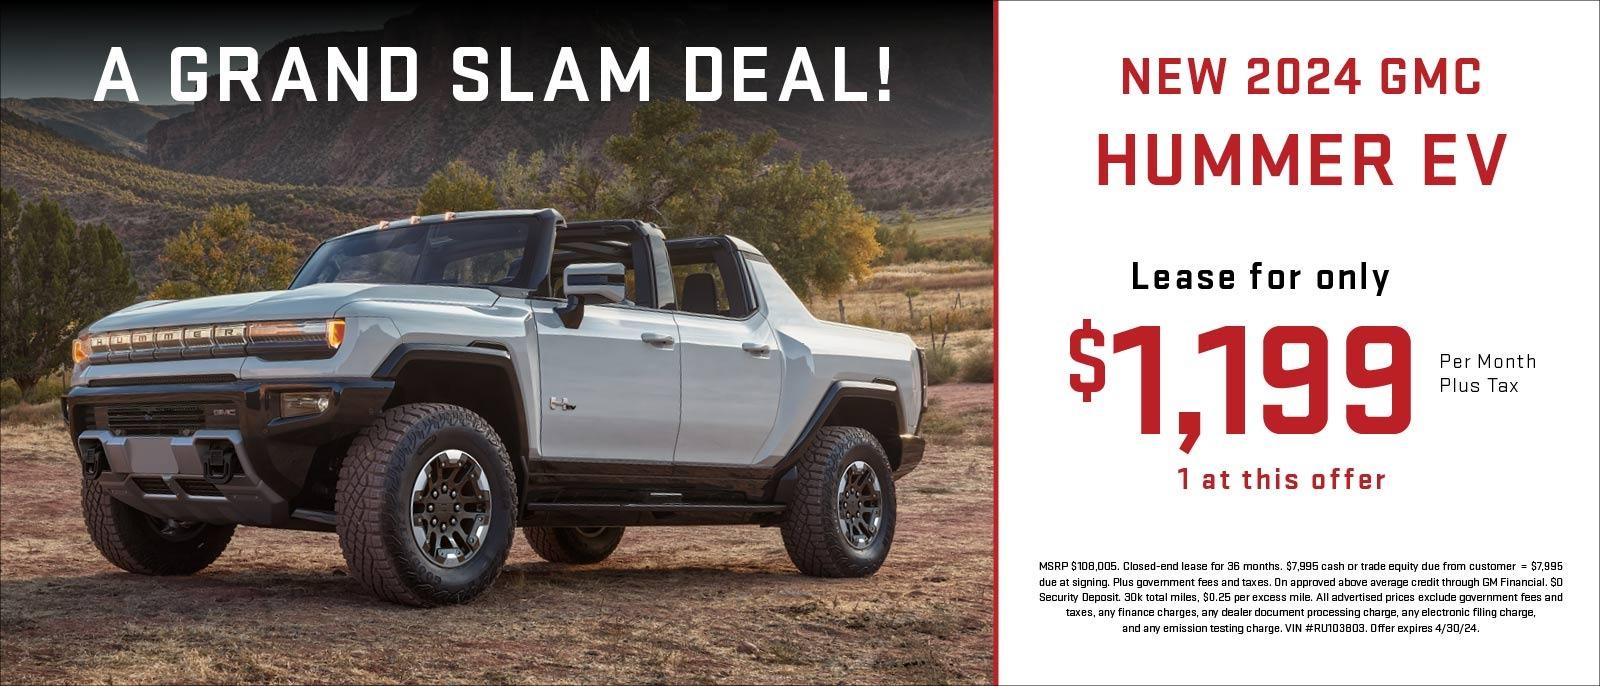 NEW 2024 GMC HUMMER EV Lease for only $1,199 Per Month Plus Tax 1 at this offer